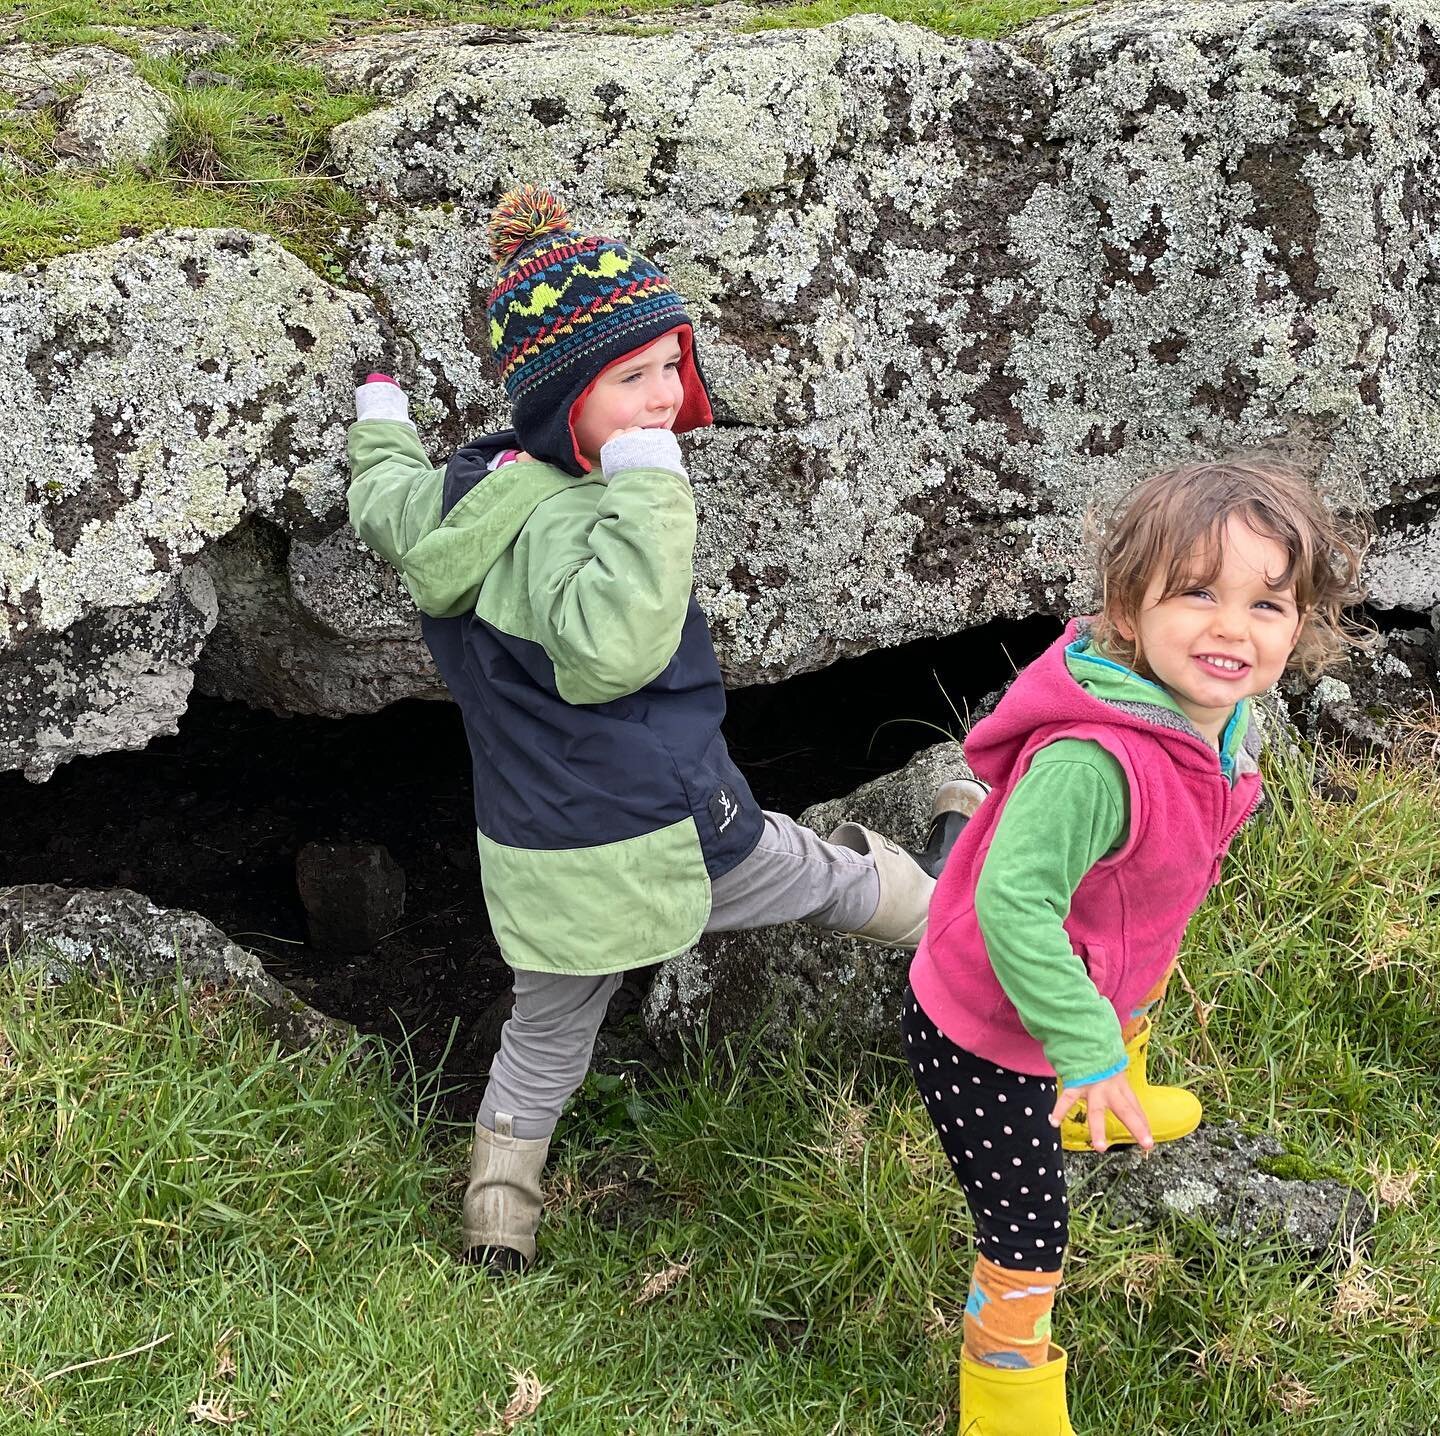 Yes to finding new outdoor playmates! Excited to welcome Elsbeth and these two kiddos to Our Outdoors.

&ldquo;We are just getting ready to move back to the USA after living in NZ for many years. Over here, we try to get outside as much as possible, 